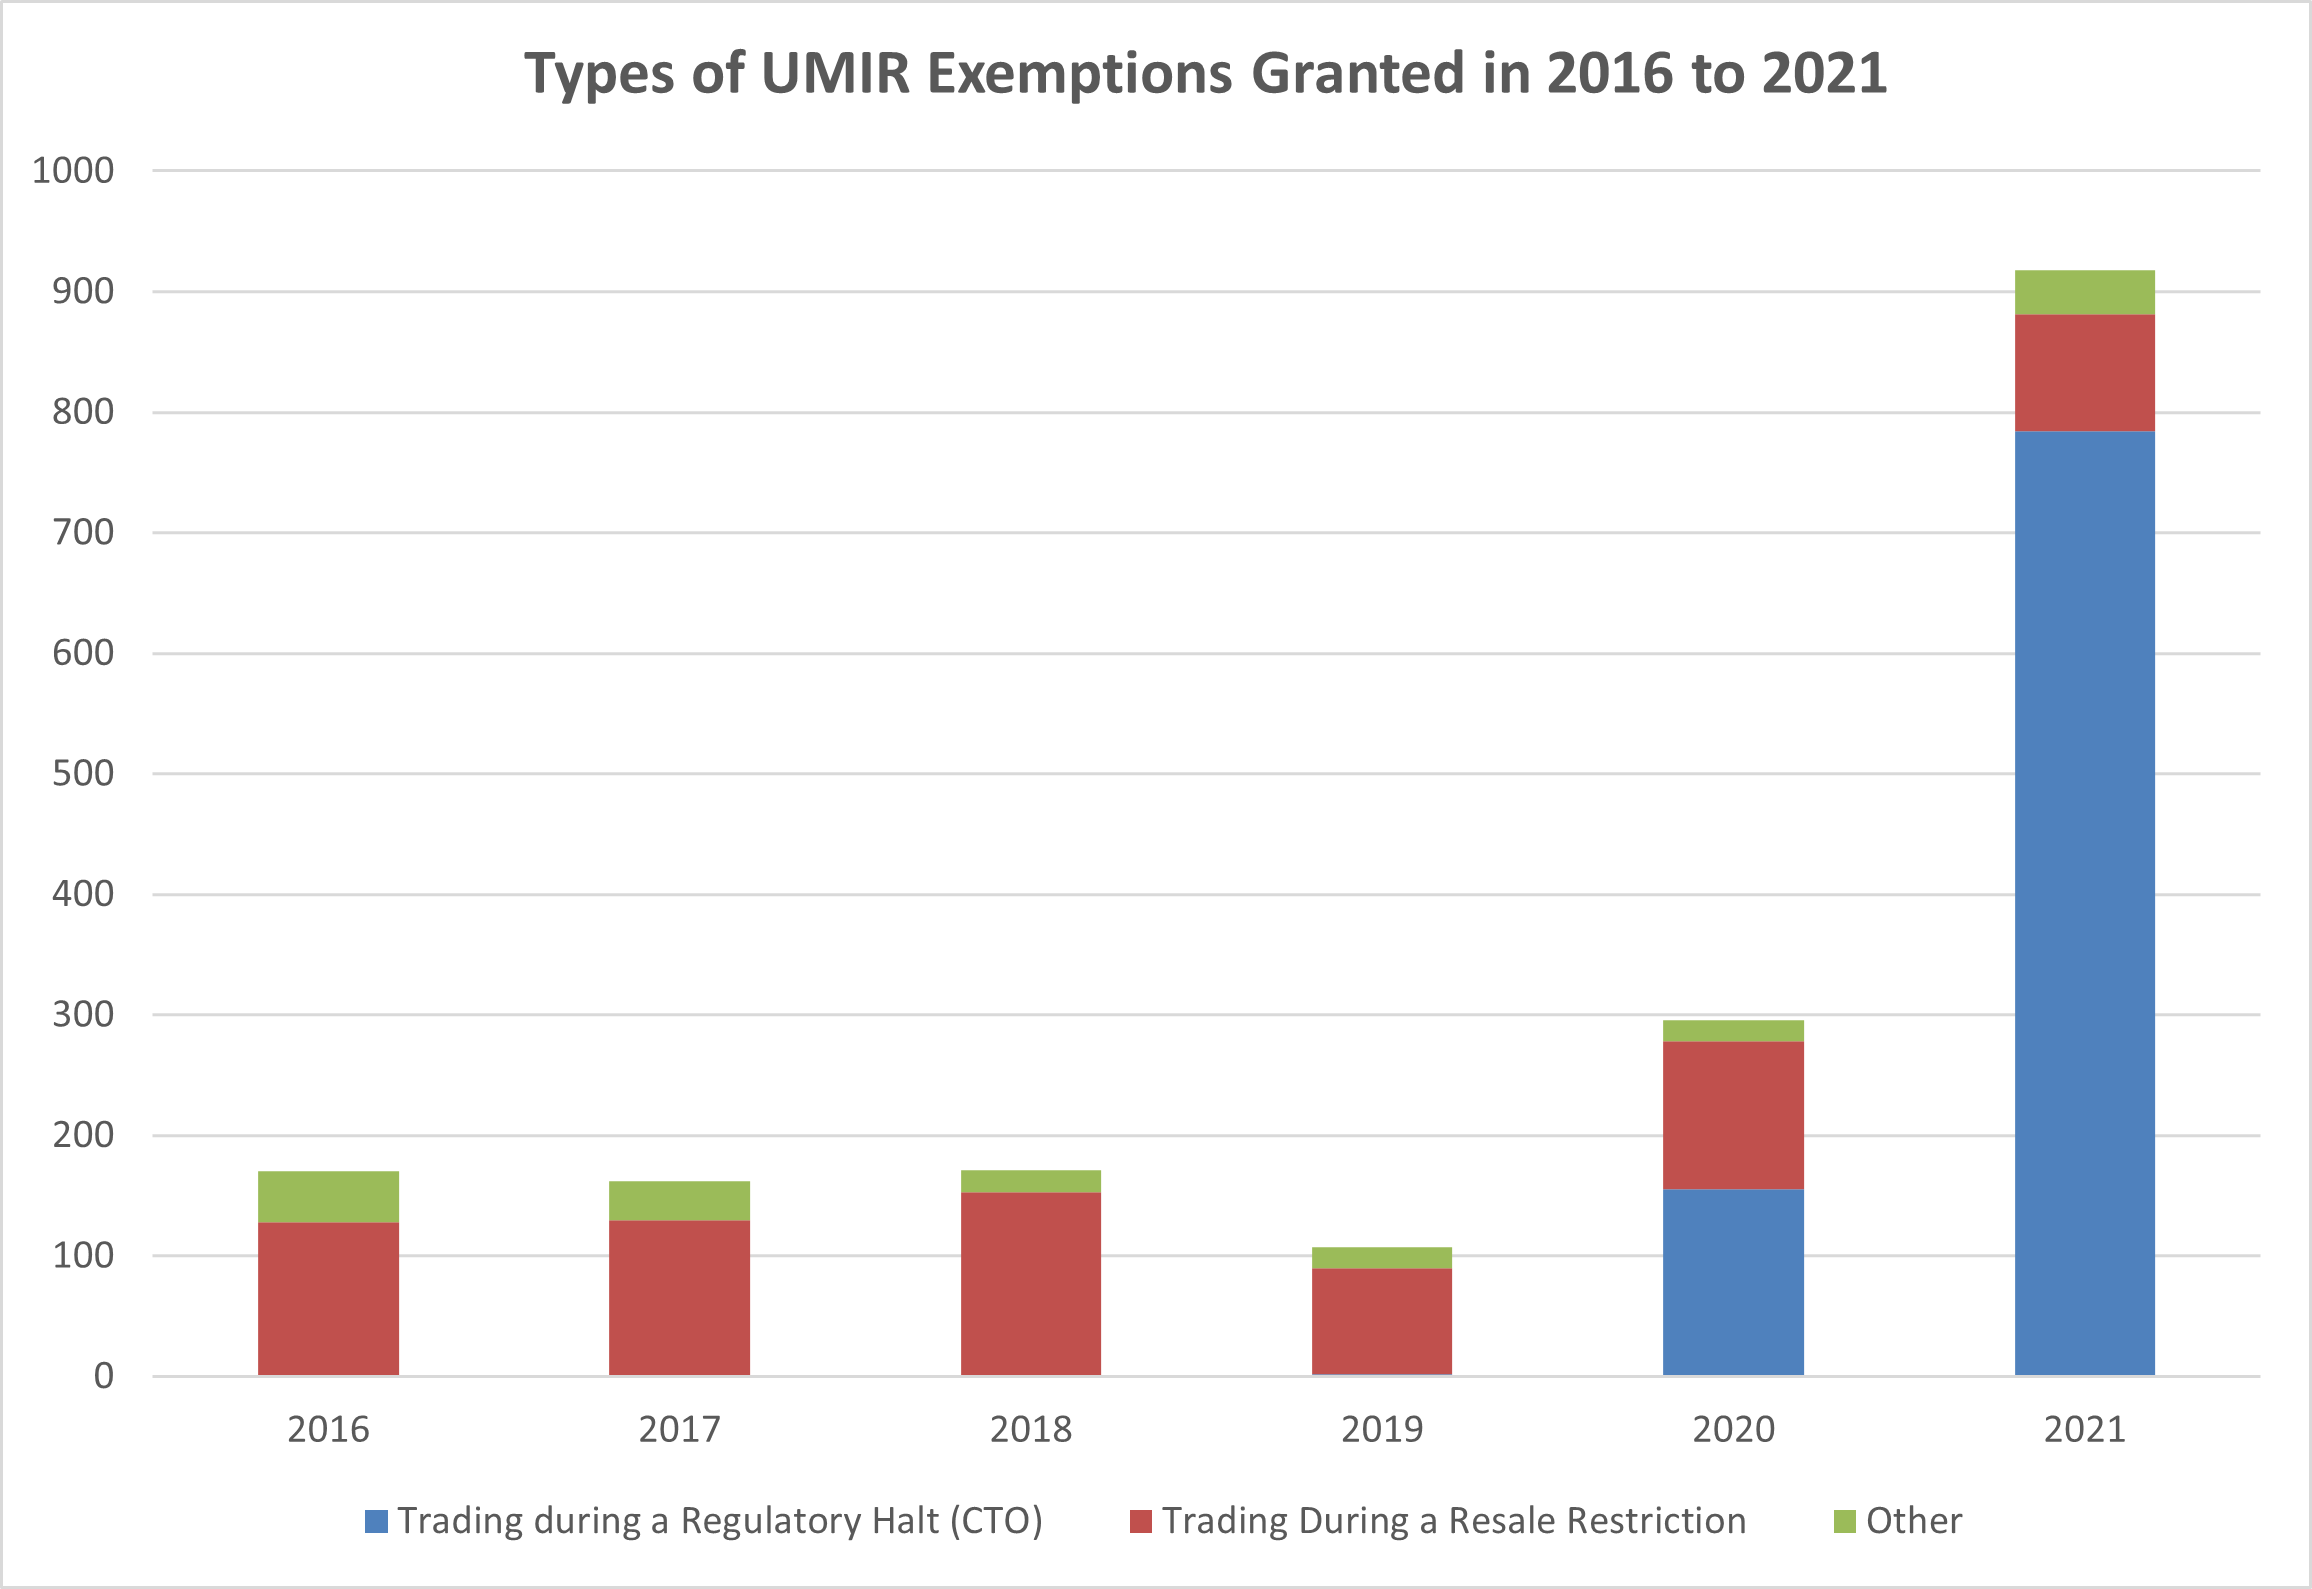 Types of UMIR Exemptions Granted in 2016 to 2021